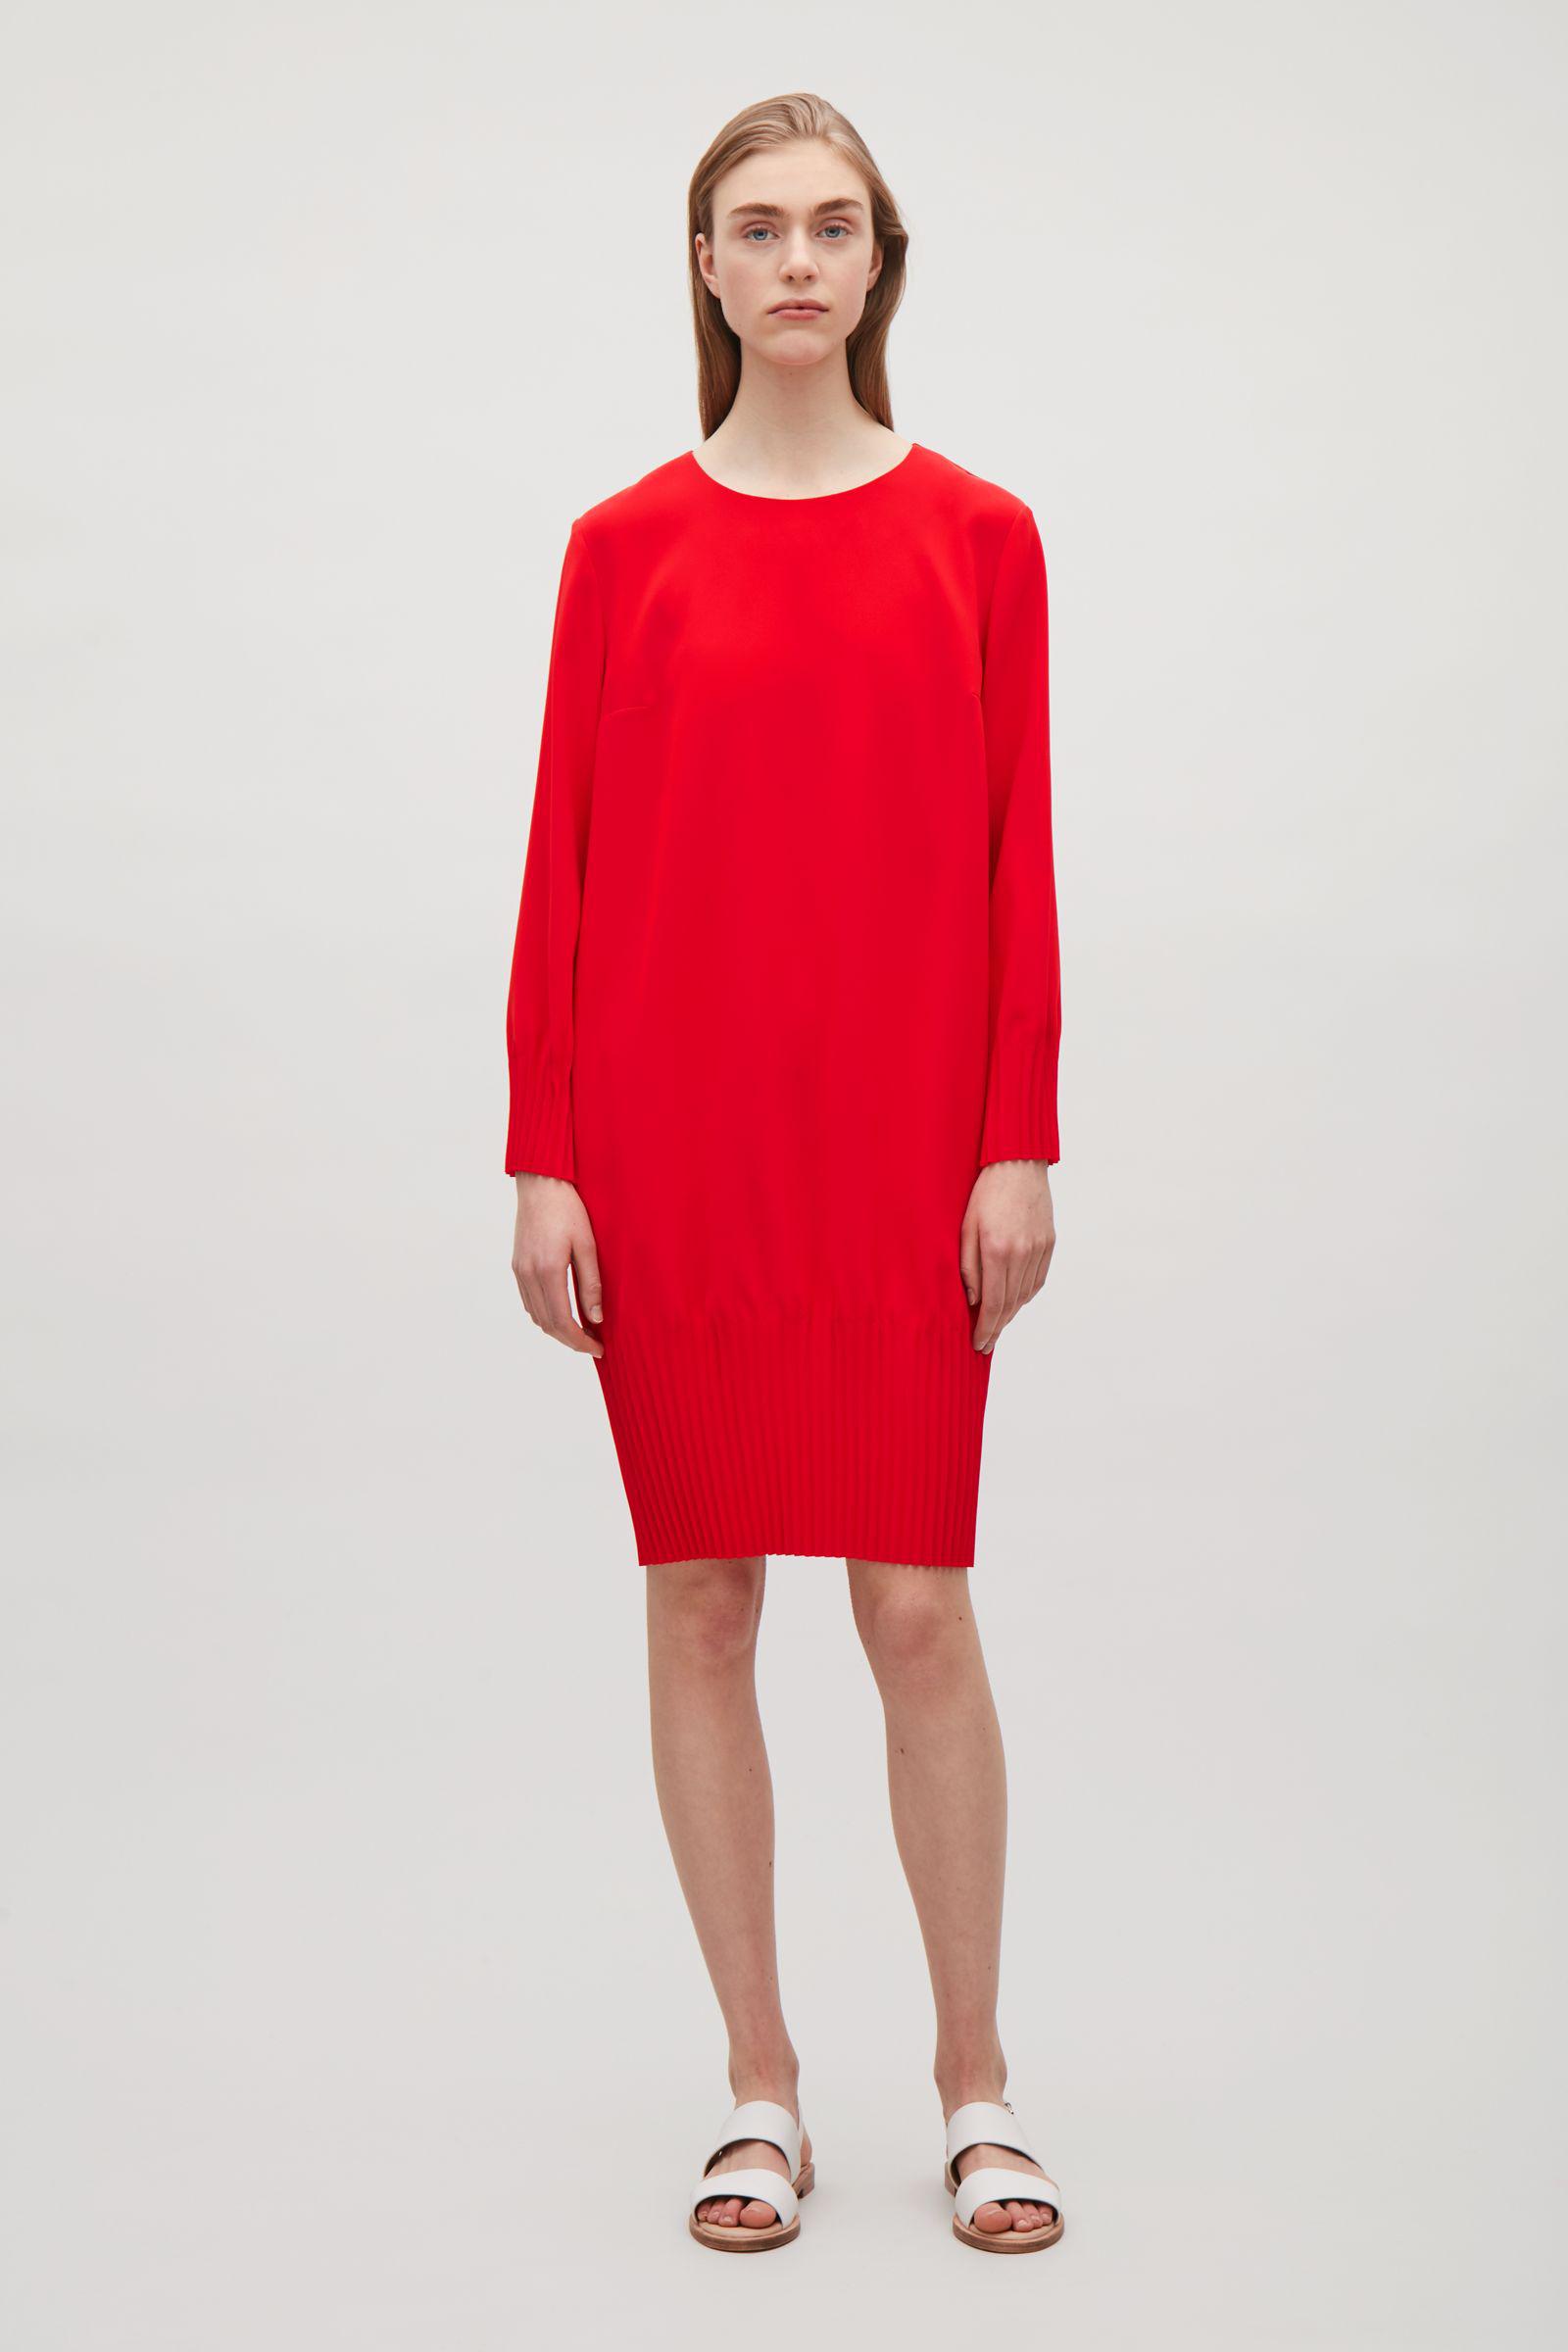 COS Synthetic Dress With Pleated Hems in Red - Lyst